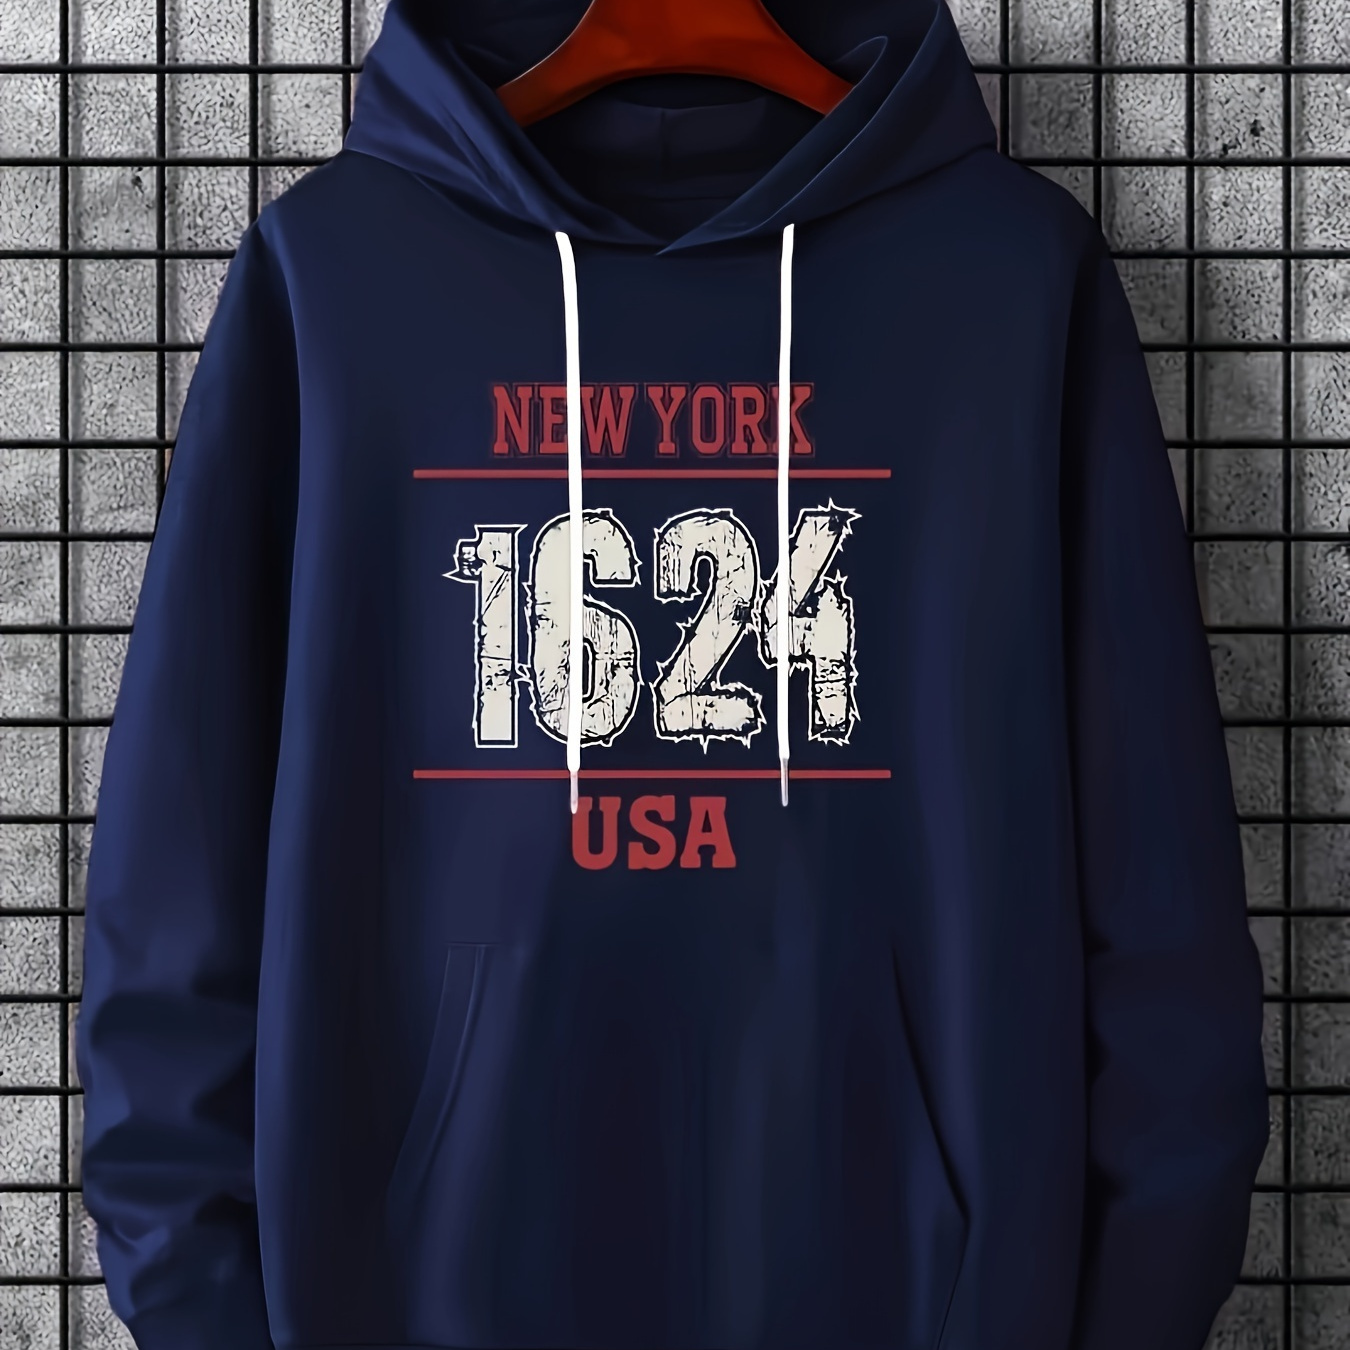 

Men's Usa 1624 Print Hoodie, Casual Slightly Stretch Breathable Hooded Sweatshirt For Spring Fall Outdoor